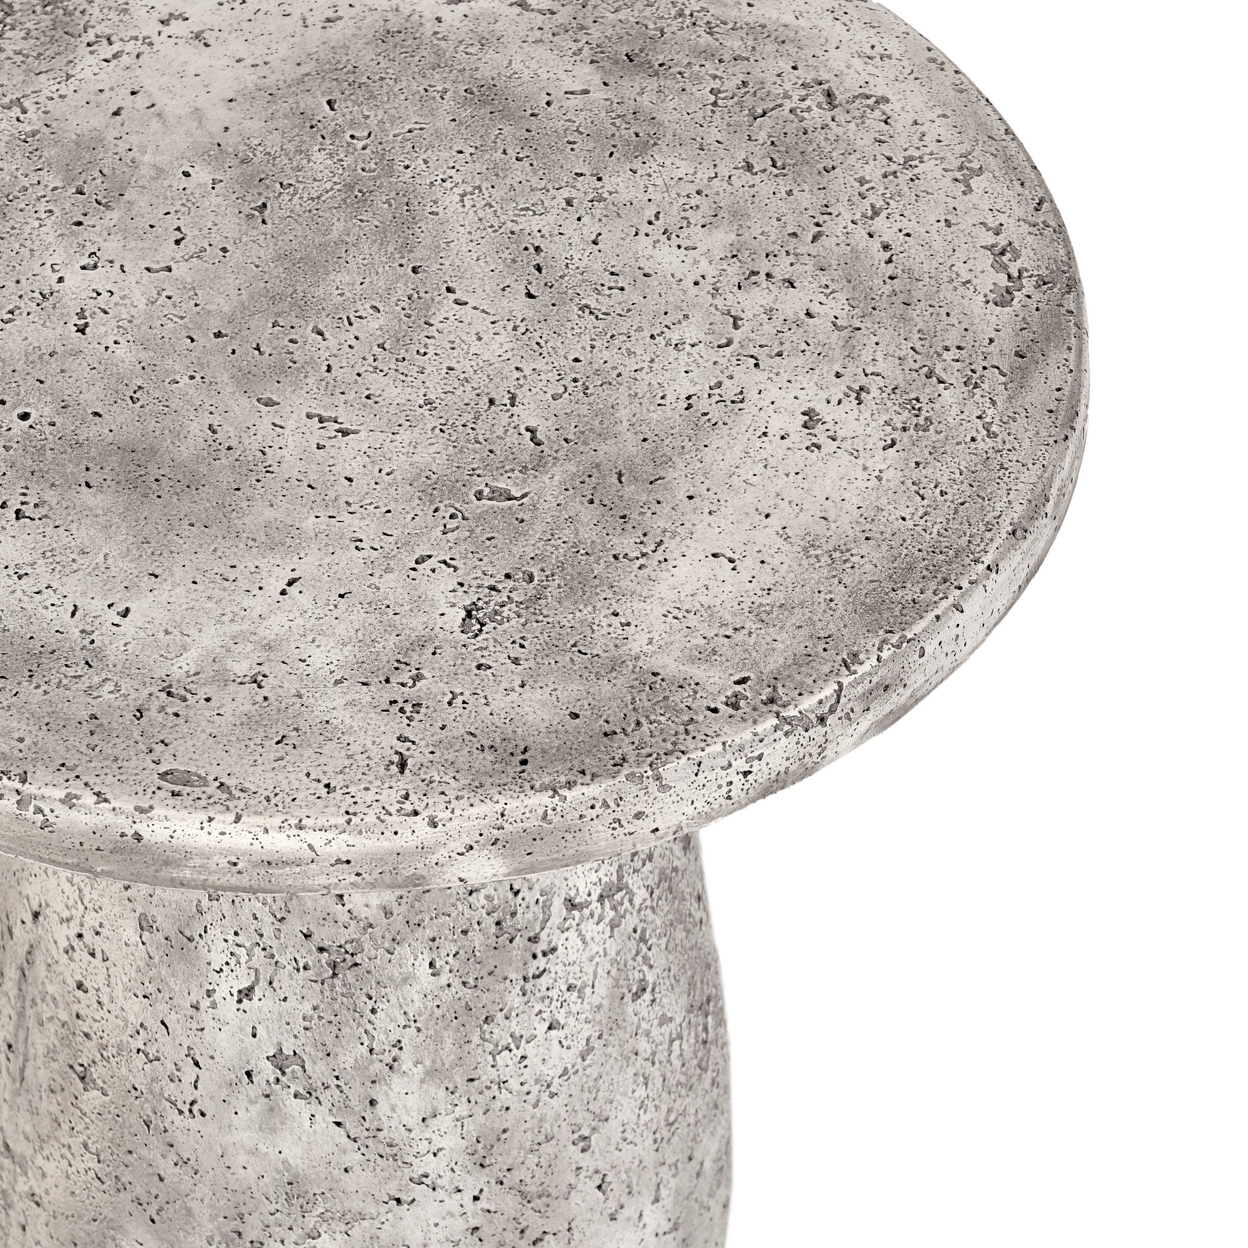 18 Inch Concrete Outdoor Accent Table, Round Tabletop, Light Gray Finish -Saltoro Sherpi